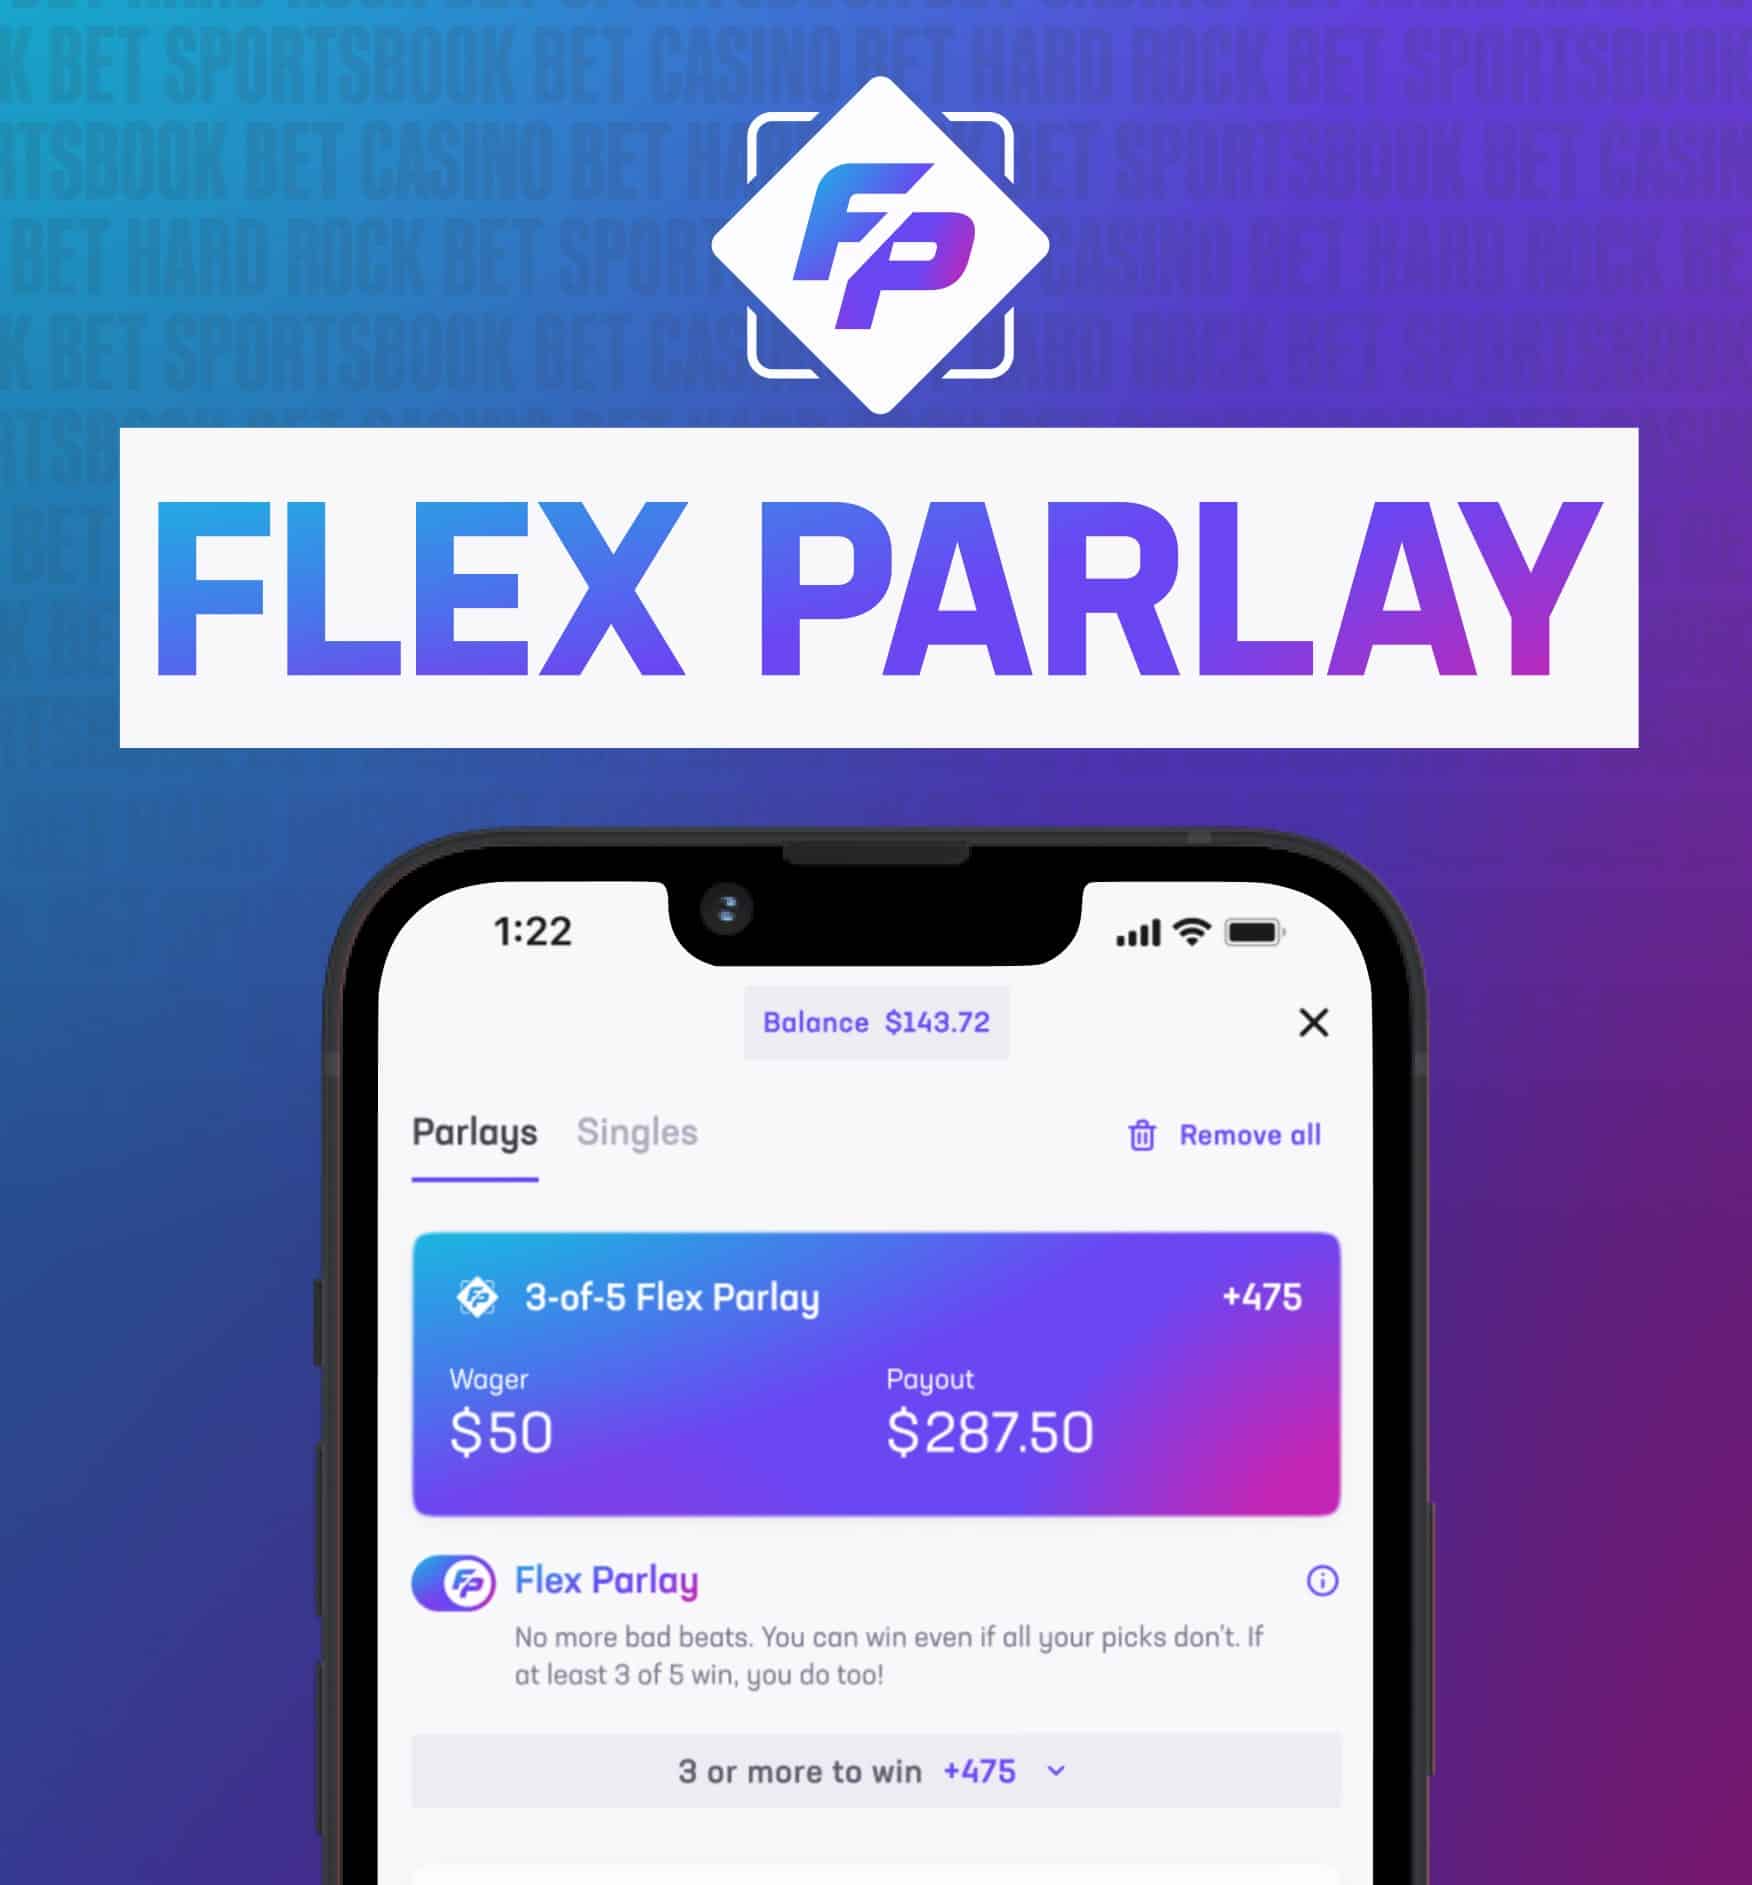 New Feature: It’s Time to Flex Parlay!